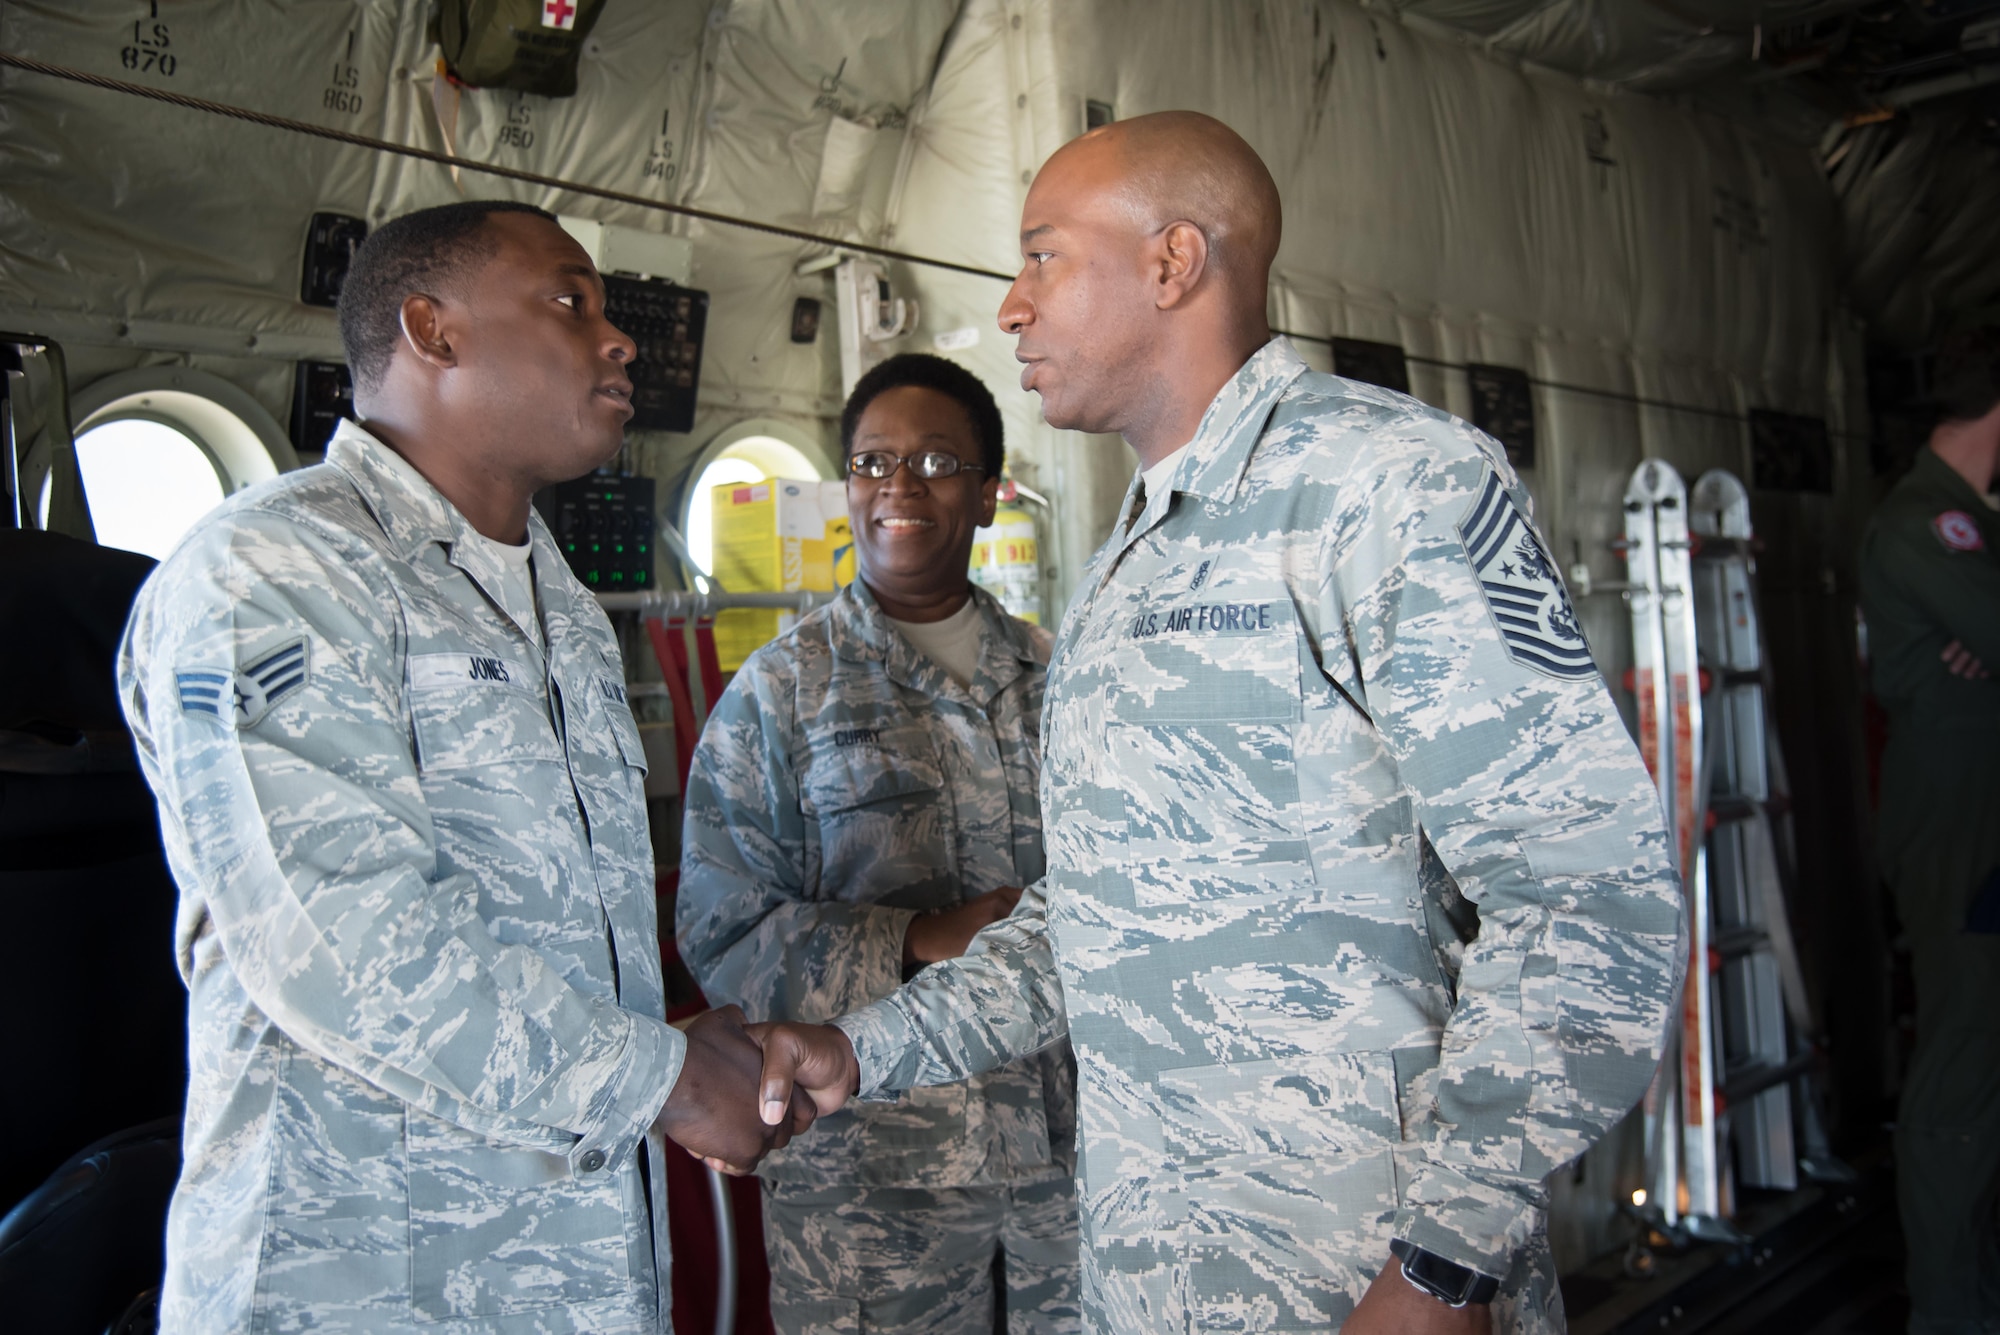 Chief Master Sergeant of the Air Force Kaleth O. Wright presents a coin to Senior Airman Laborian Jones, 403rd Aeromedical Staging Squadron, during his visit to the 403rd Wing Oct. 25, 2017 at Keelser Air Force Base, Mississippi. (U.S. Air Force photo/Staff Sgt. Heather Heiney)